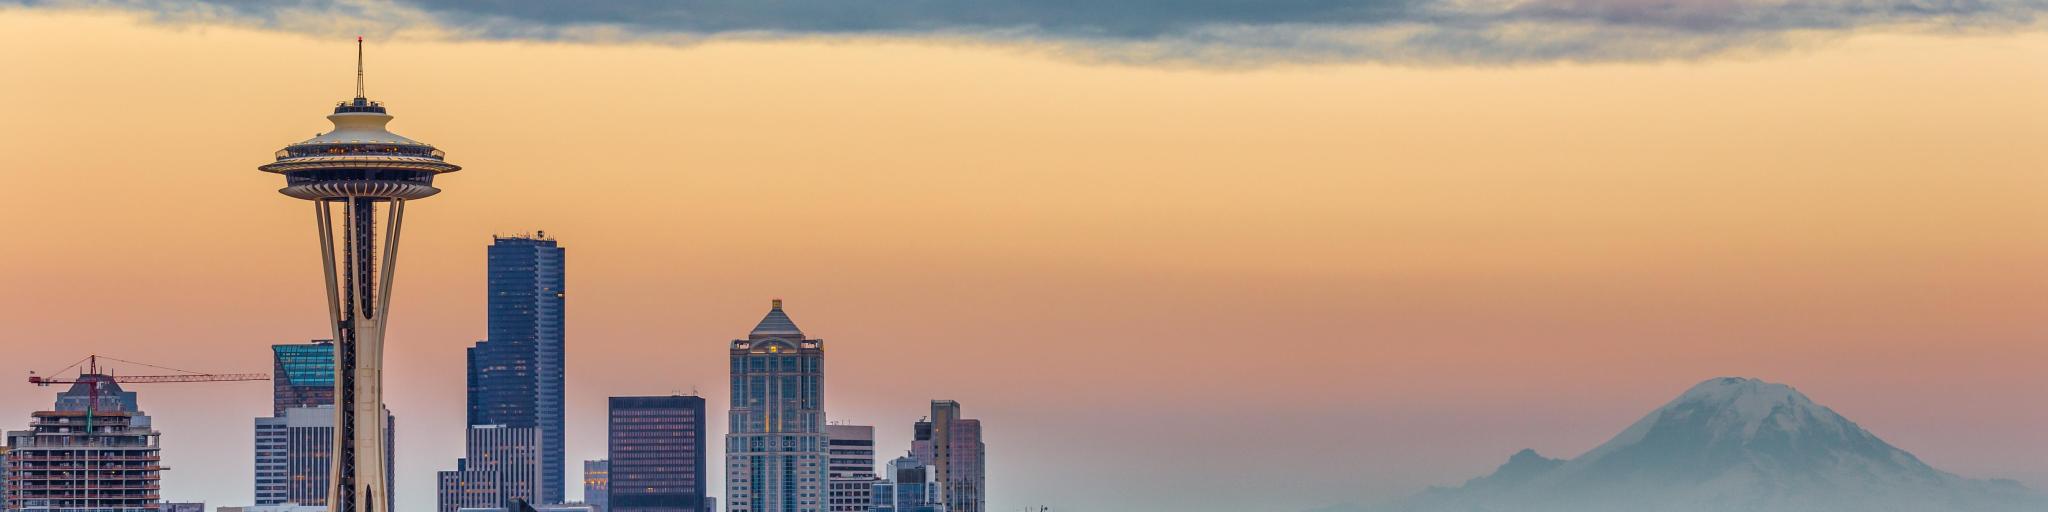 Seattle Skyline at sunset. The photo is taken on a slightly cloudy day and the clouds reflect the dramatic colors of the sunset. Space Needle can be seen.